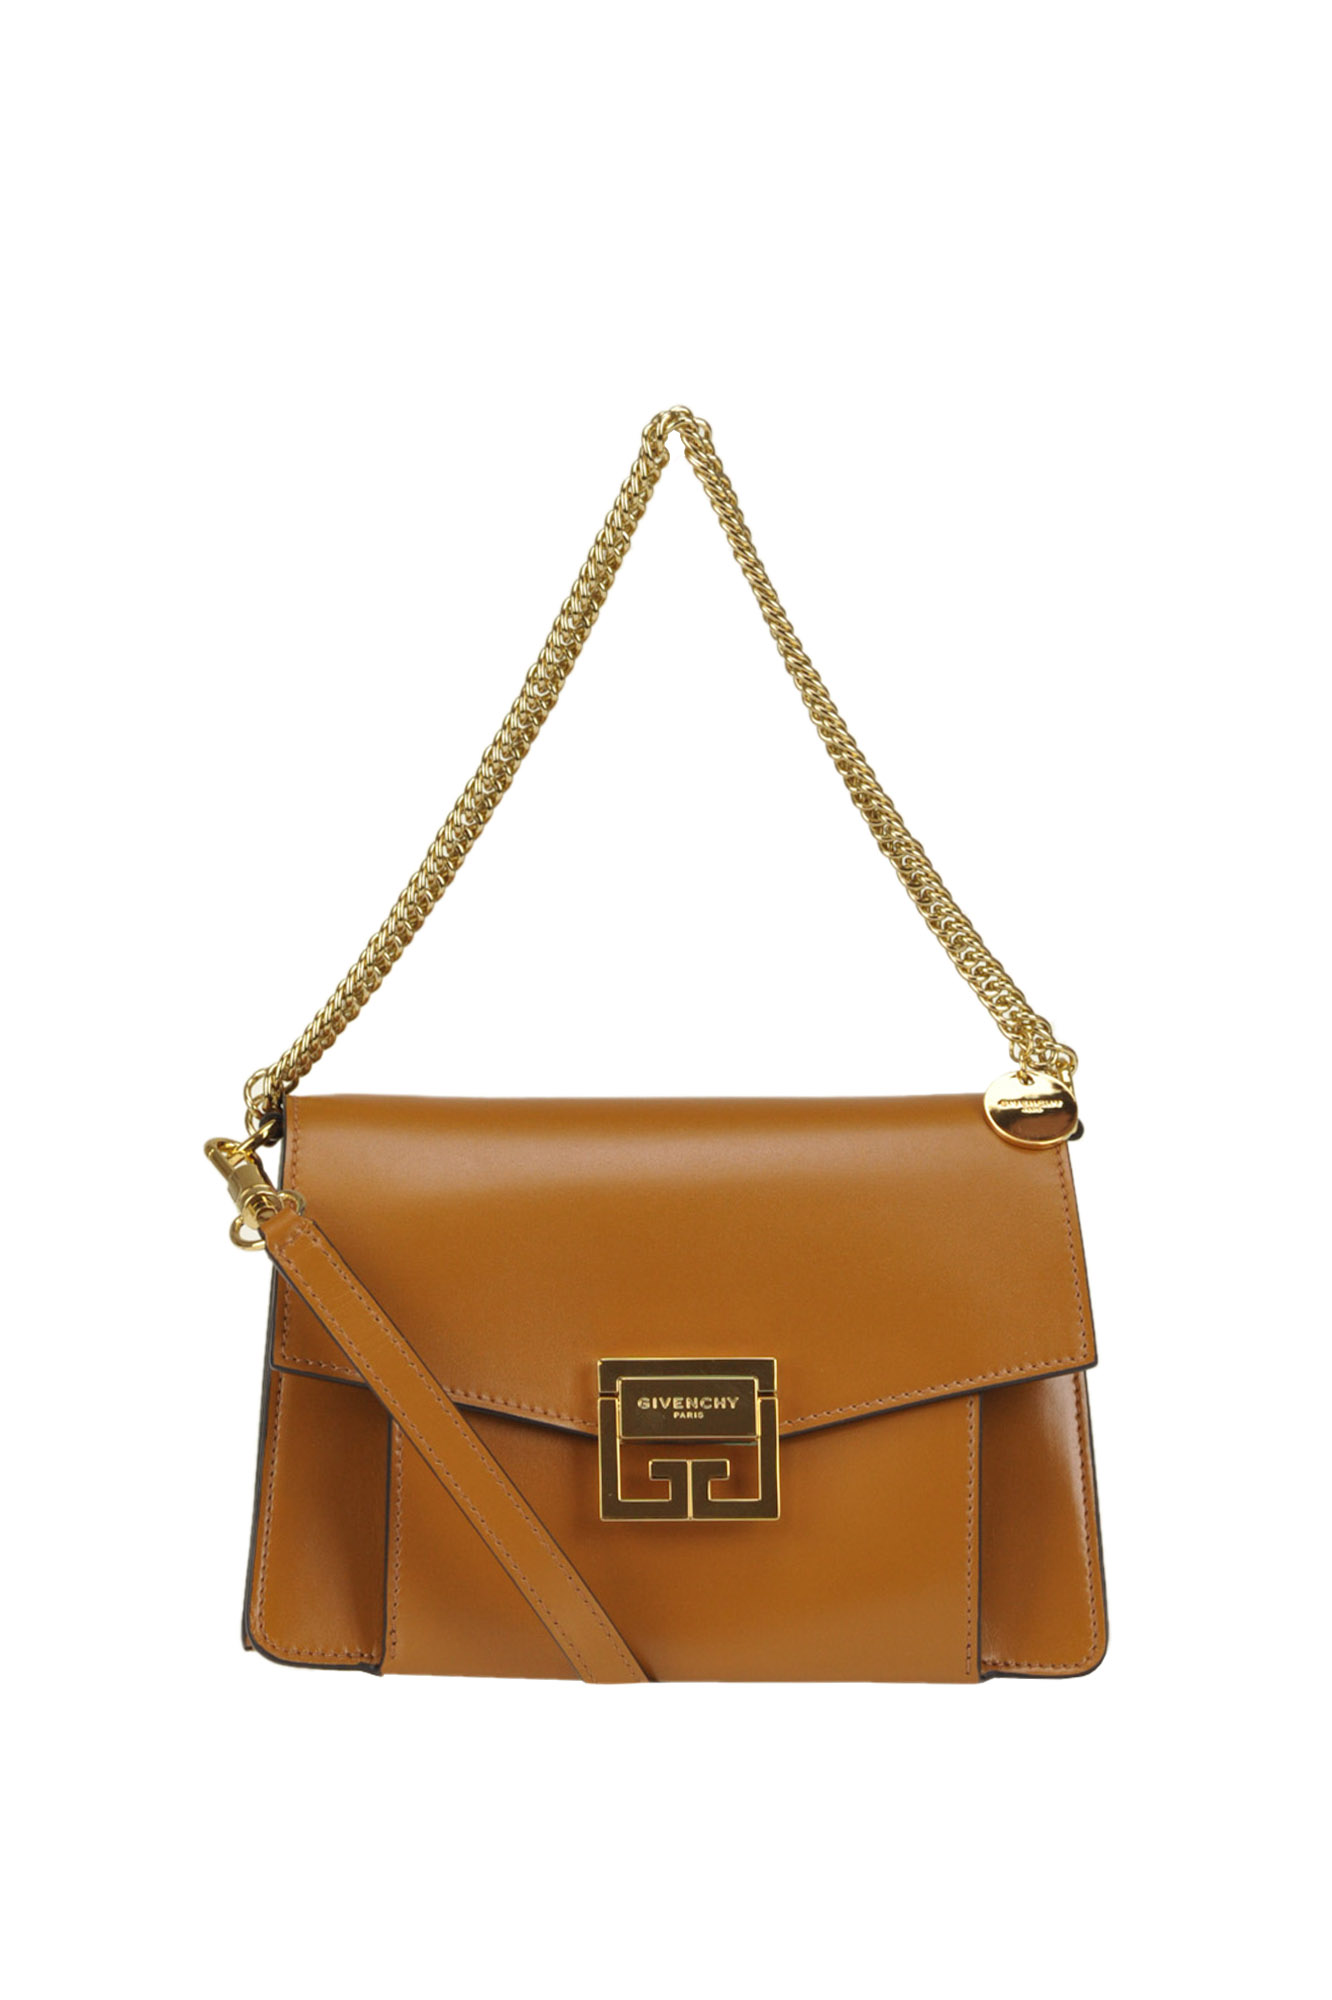 Givenchy Gv3 Small Leather Shoulder Bag In Light Brown